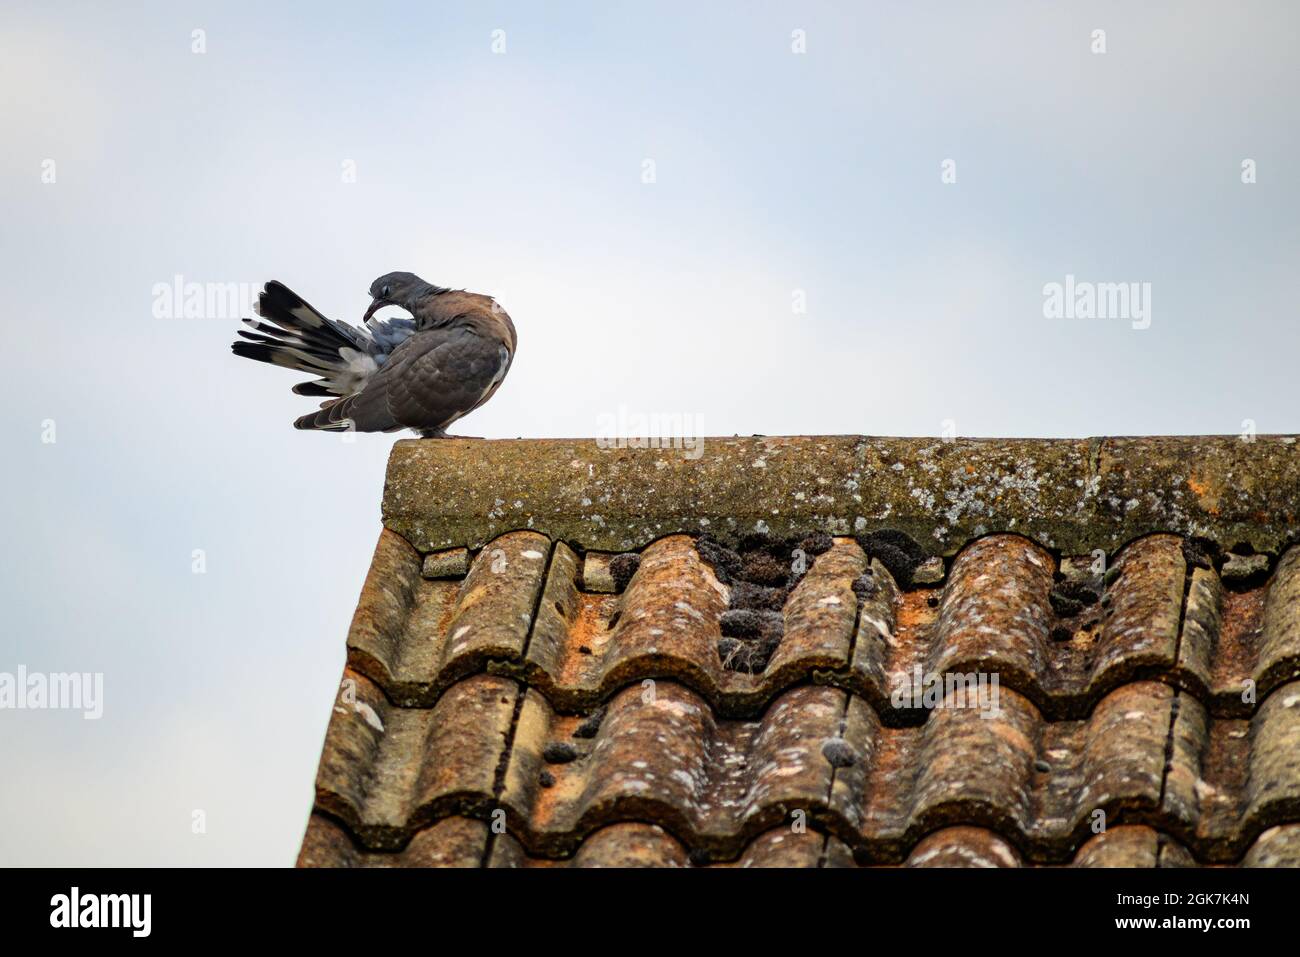 Wood pigeon on roof tiles striking a pose Stock Photo